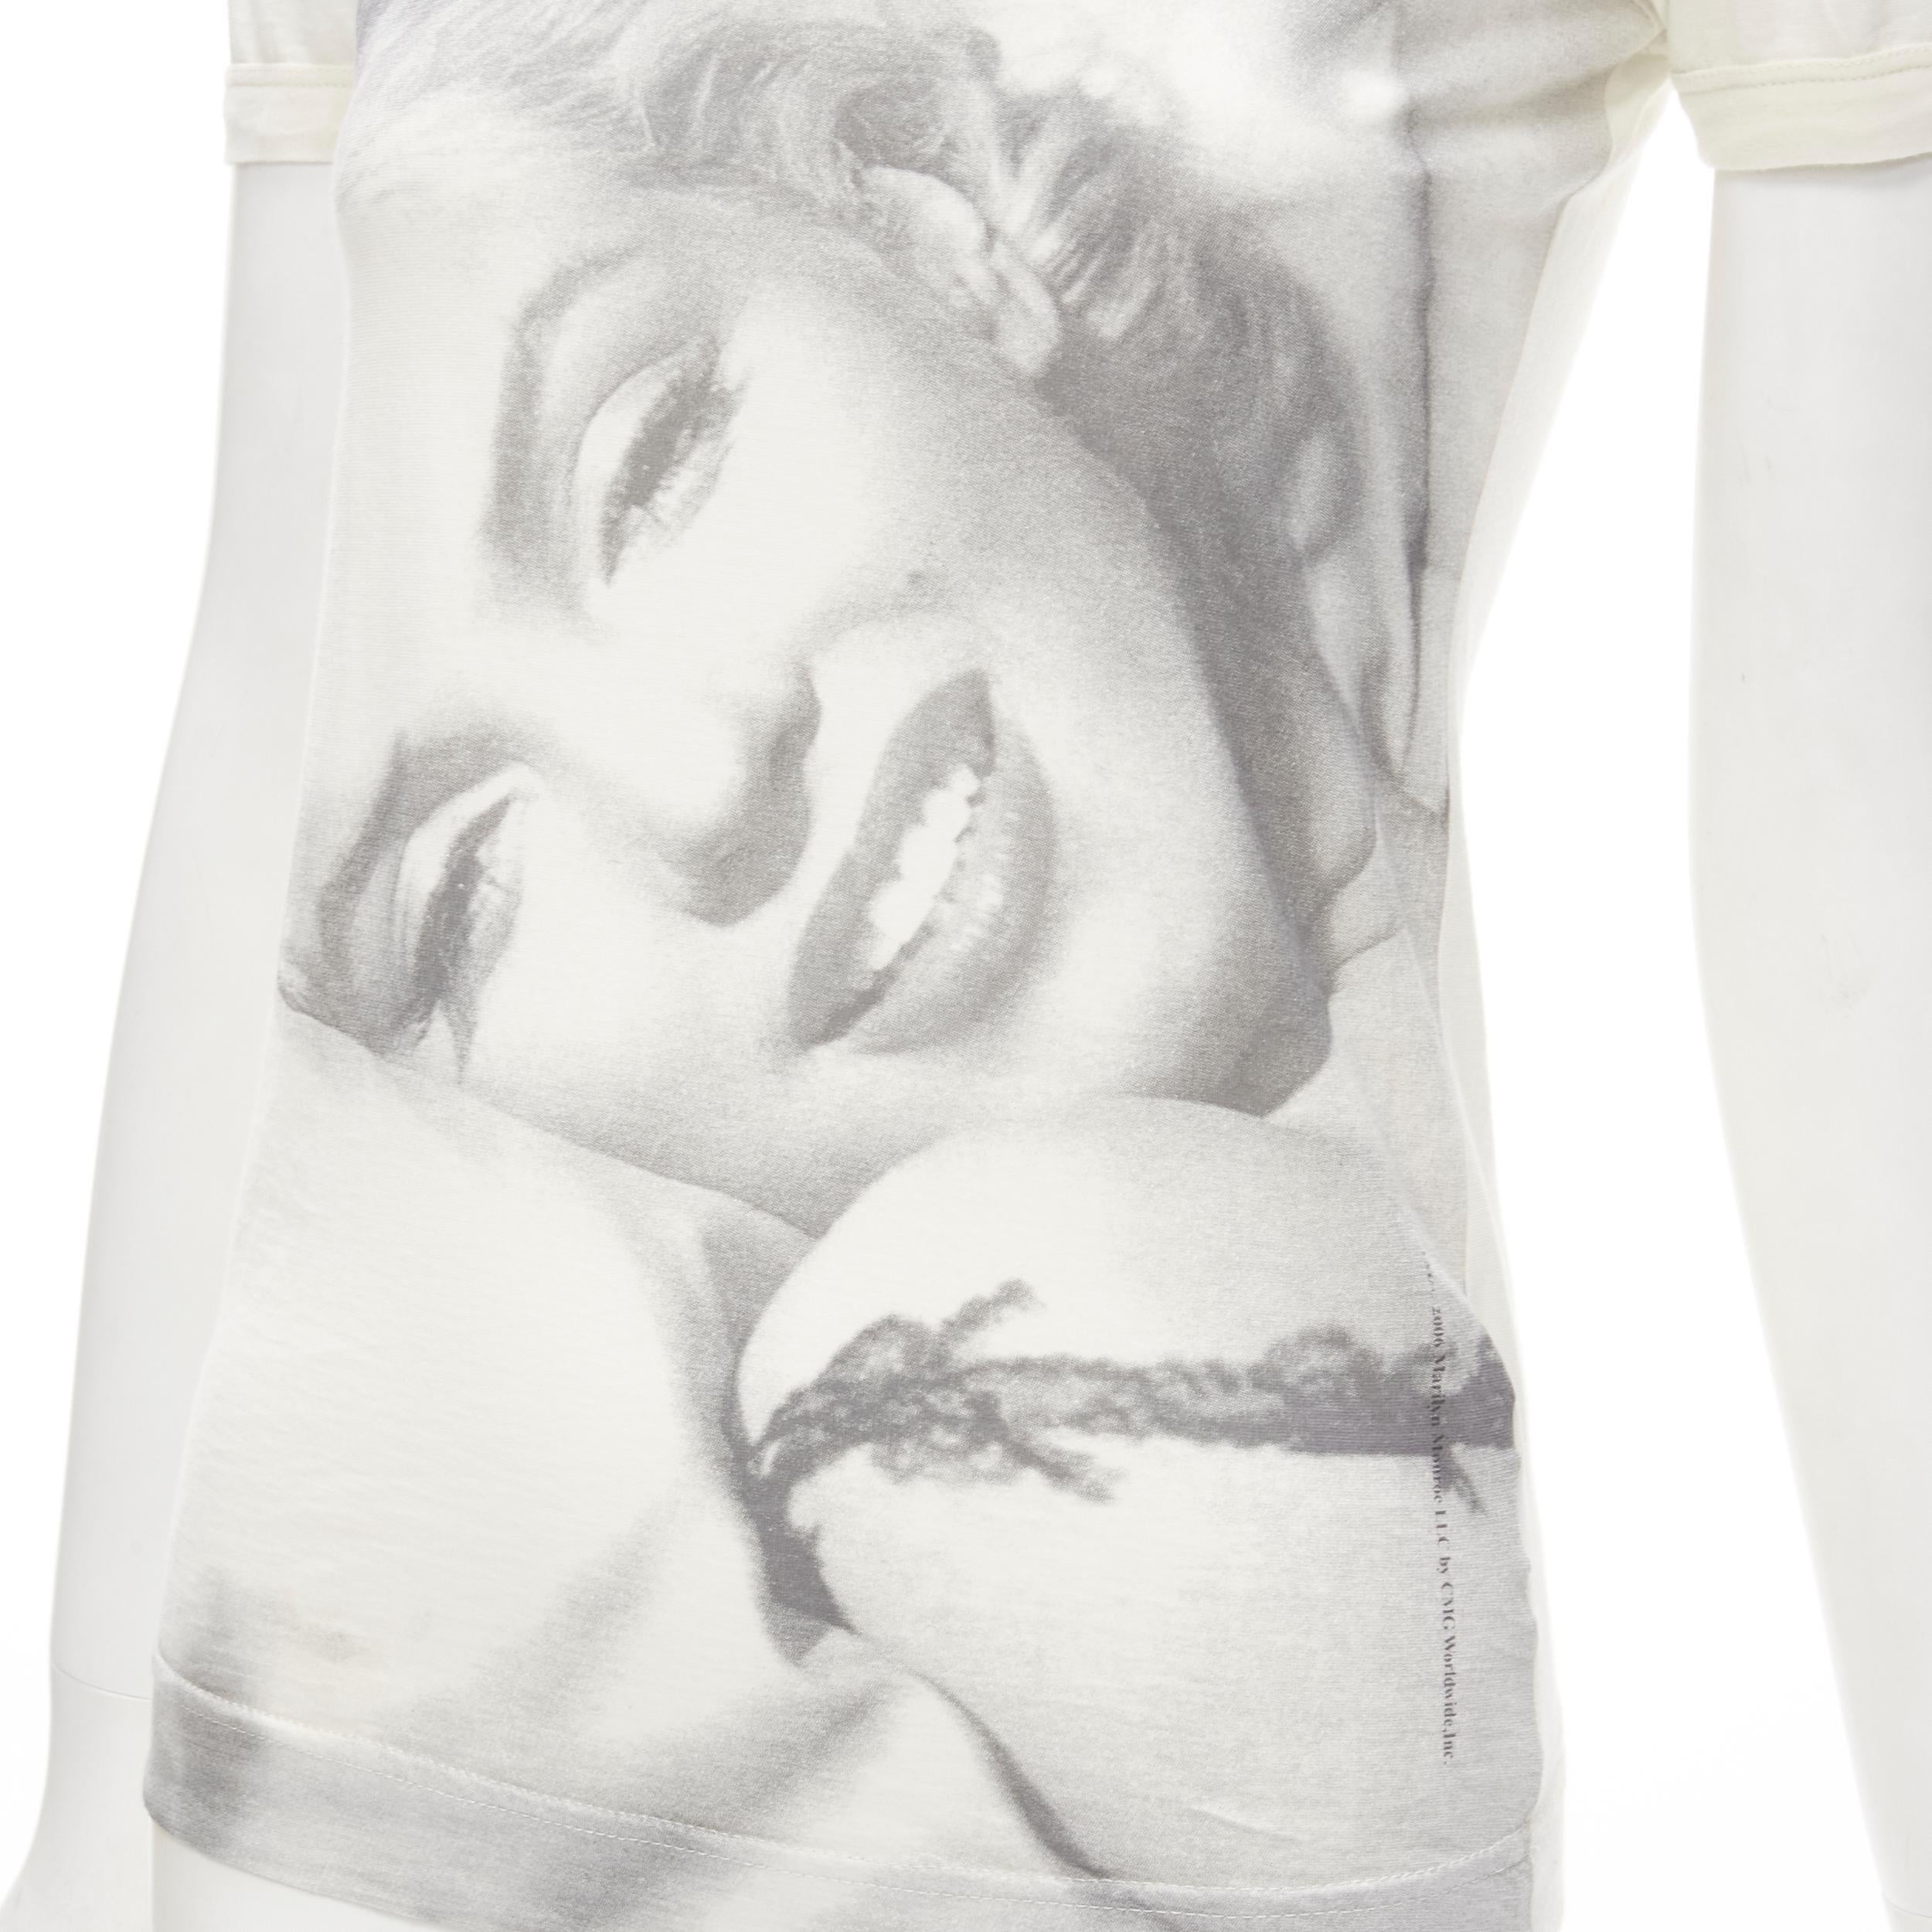 DOLCE GABBANA Vintage Marilyn Monroe Y2K photo print cotton tshirt IT36 XS 
Reference: ANWU/A00635 
Brand: Dolce Gabbana 
Collection: Marilyn Monroe 
Material: Feels like cotton 
Color: Cream 
Pattern: Marilyn Monroe 
Made in: Italy 


CONDITION: